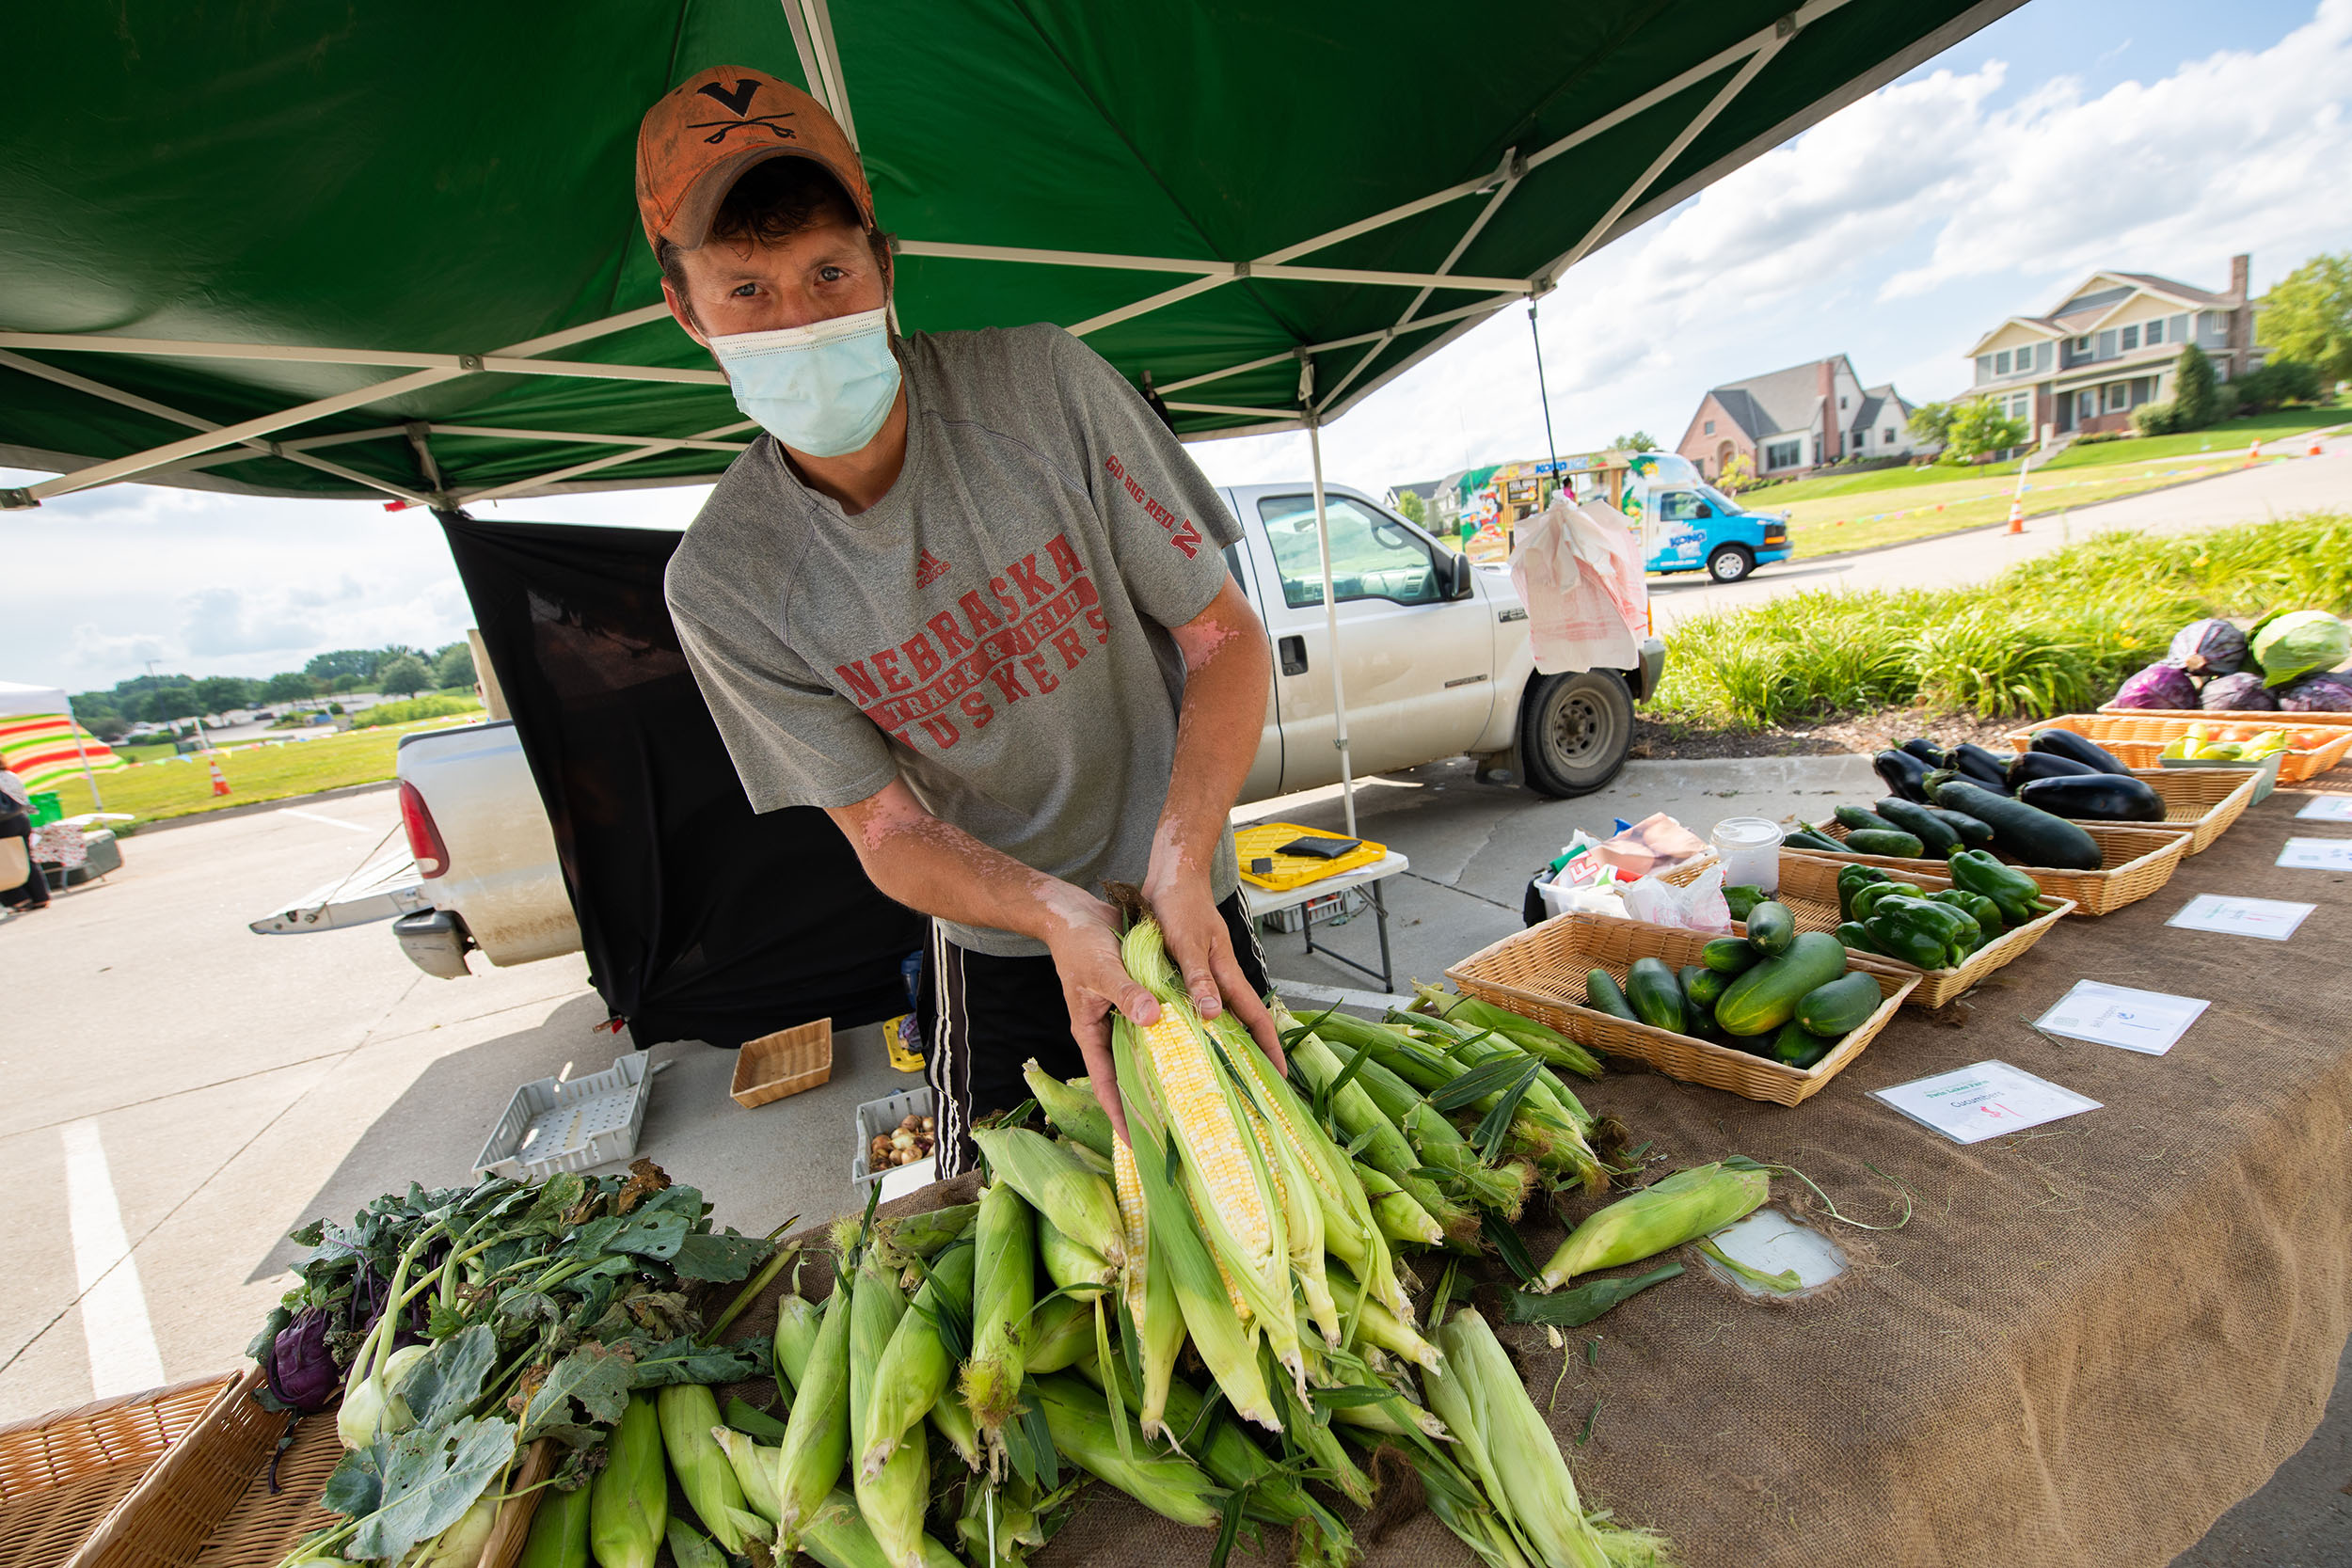 The East Campus Discovery Days and Farmer’s Market will offer hands-on, science-focused experiences from various Nebraska departments, as well as a vendor fair, live music and food trucks.